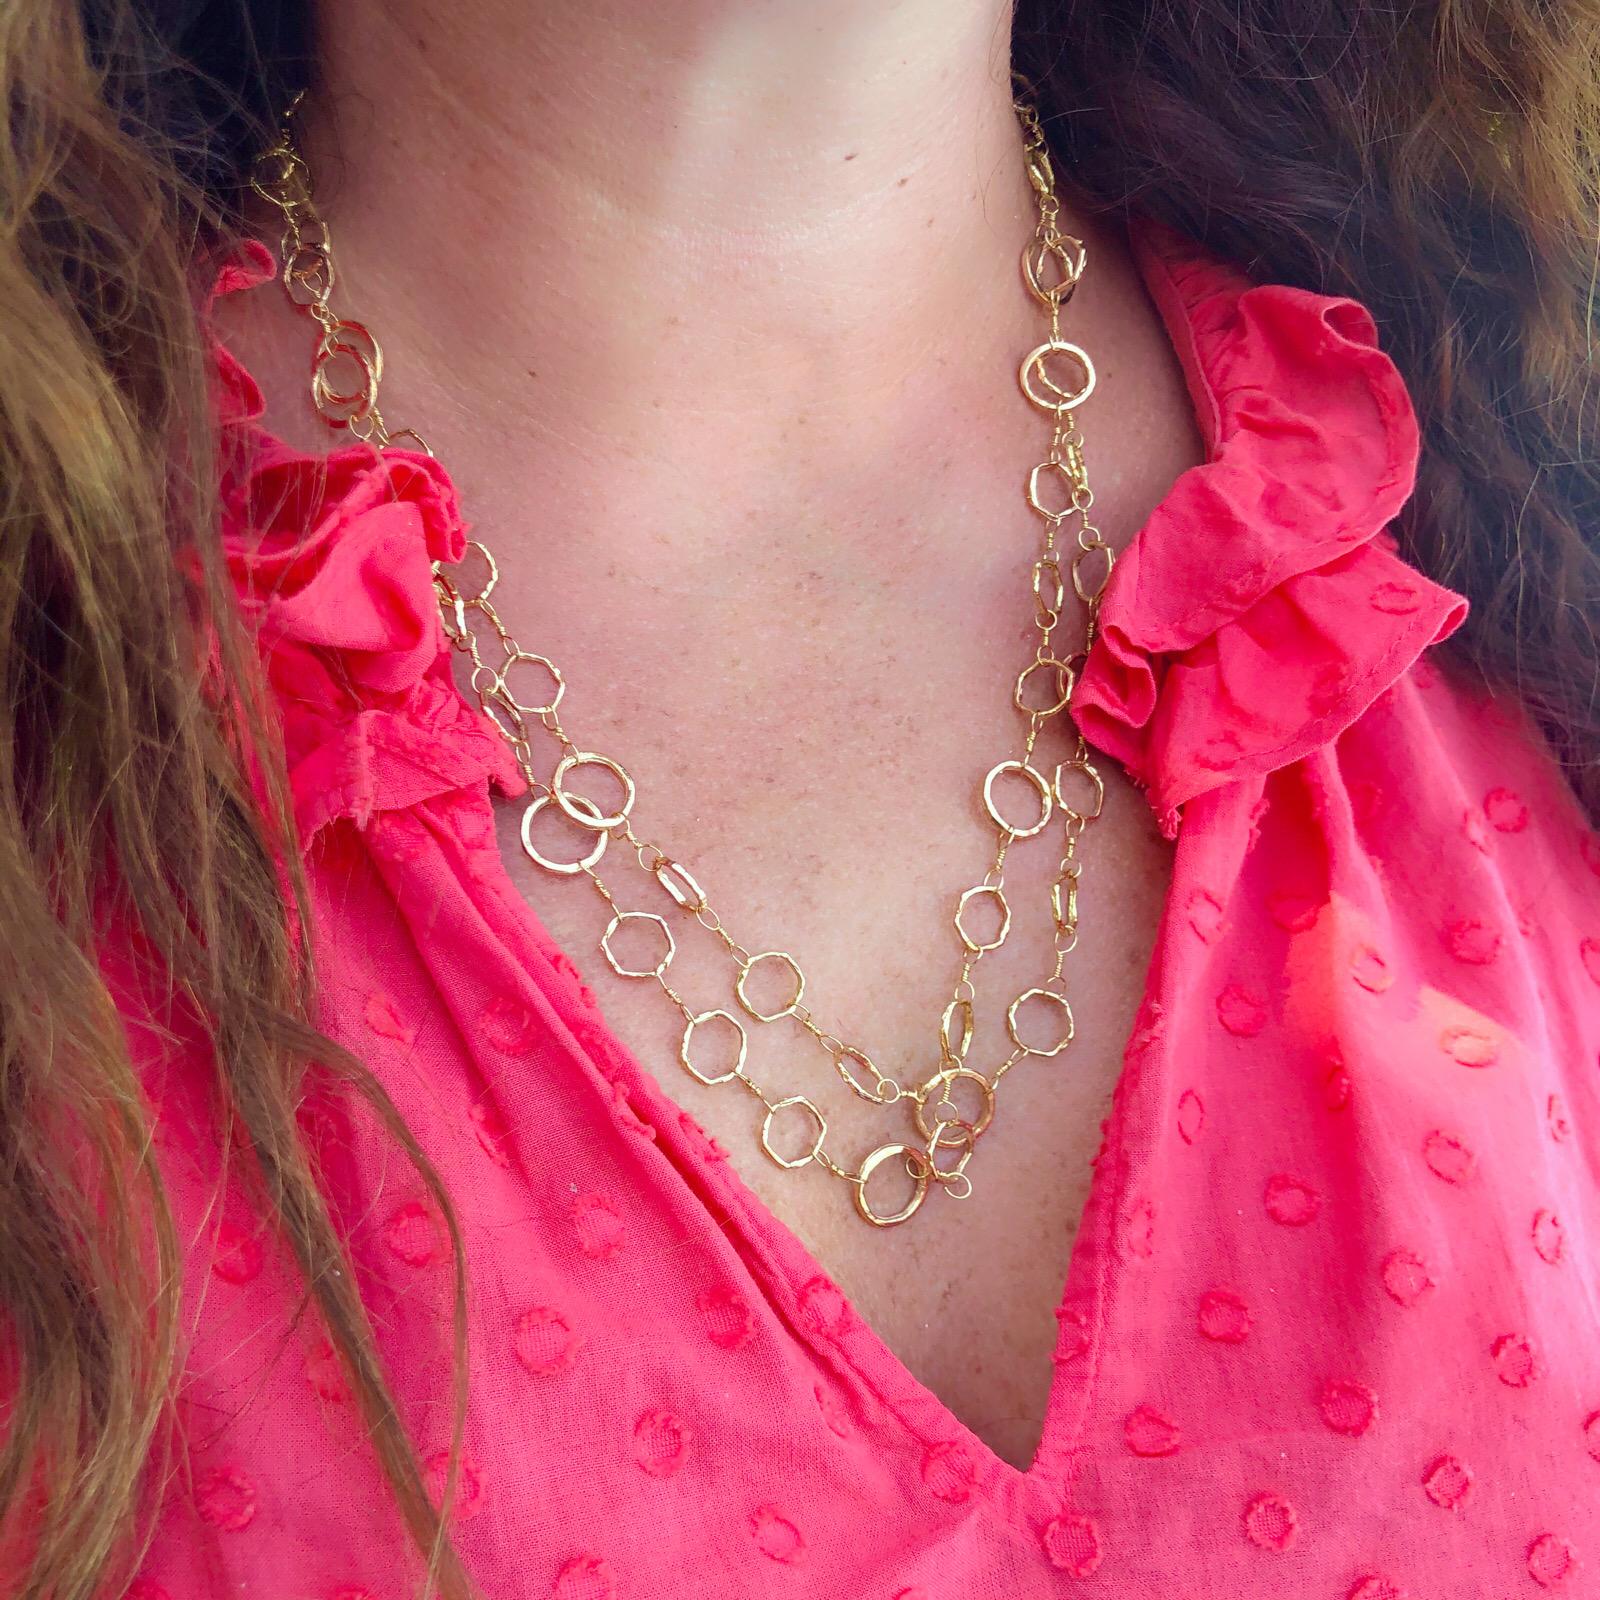 Iconic Dominique Cohen. A versatile 18k gold link chain that you can wear it every day,  solo or layered, long or lariat style. The necklace measures 46 inches, and weighs 45.6 grams. A perfect foundation piece that can be dressed up or down.